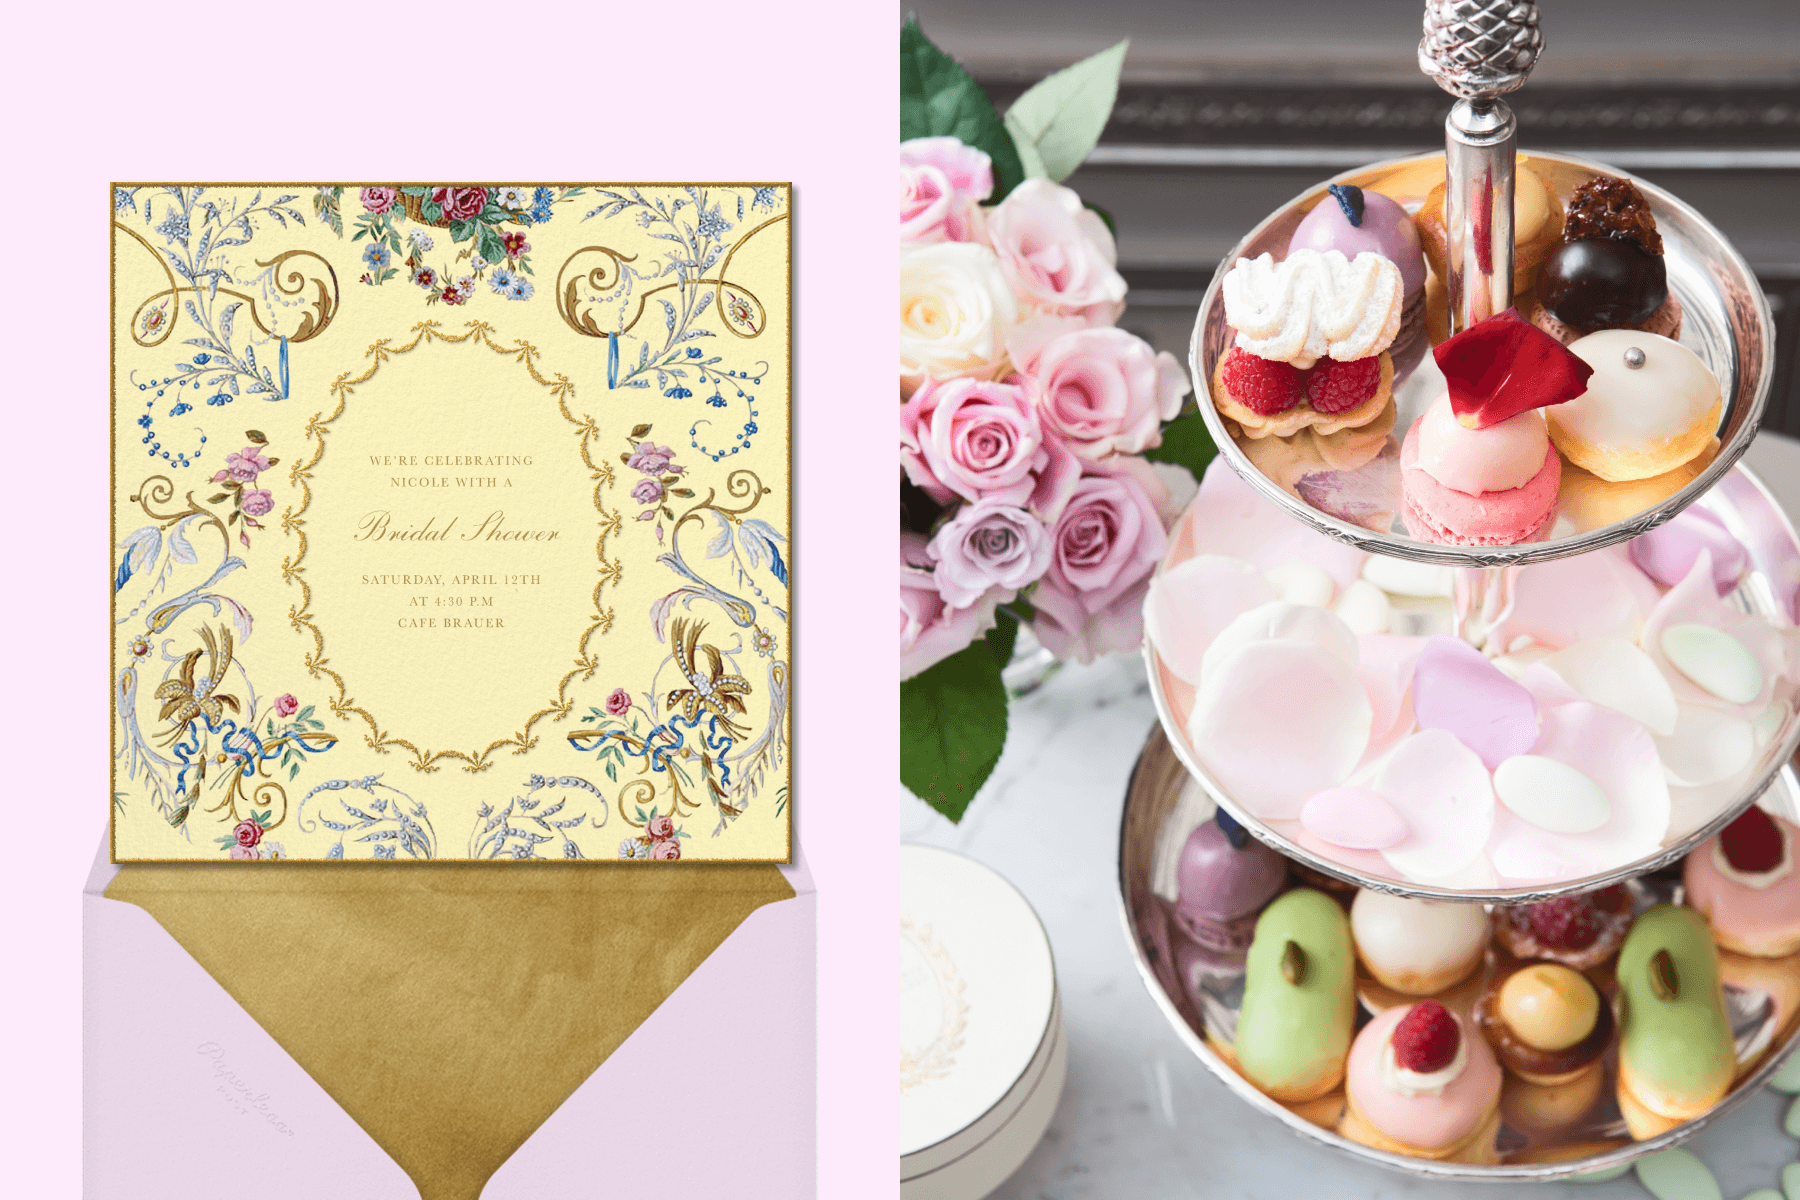 Left: A yellow Ladurée invitation with intricate gold details and pink roses; Right: A tiered display of party treats.